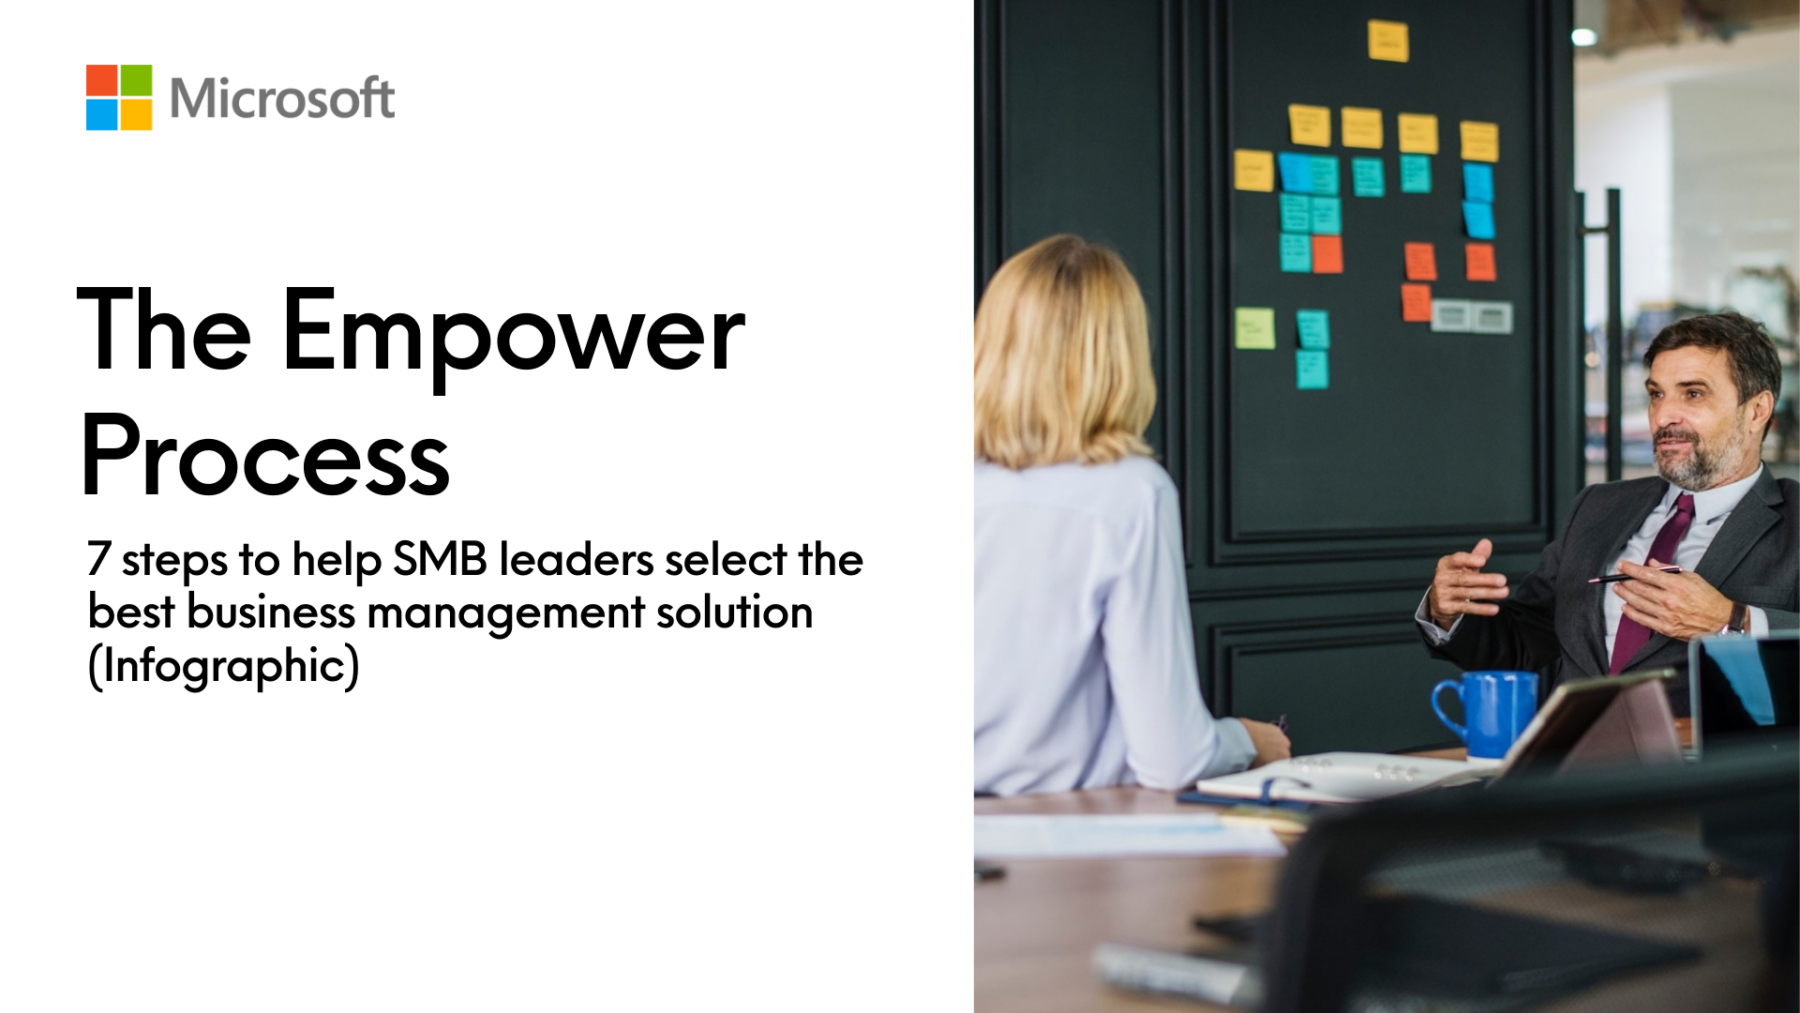 7 steps to help SMB leaders select the best business management solution